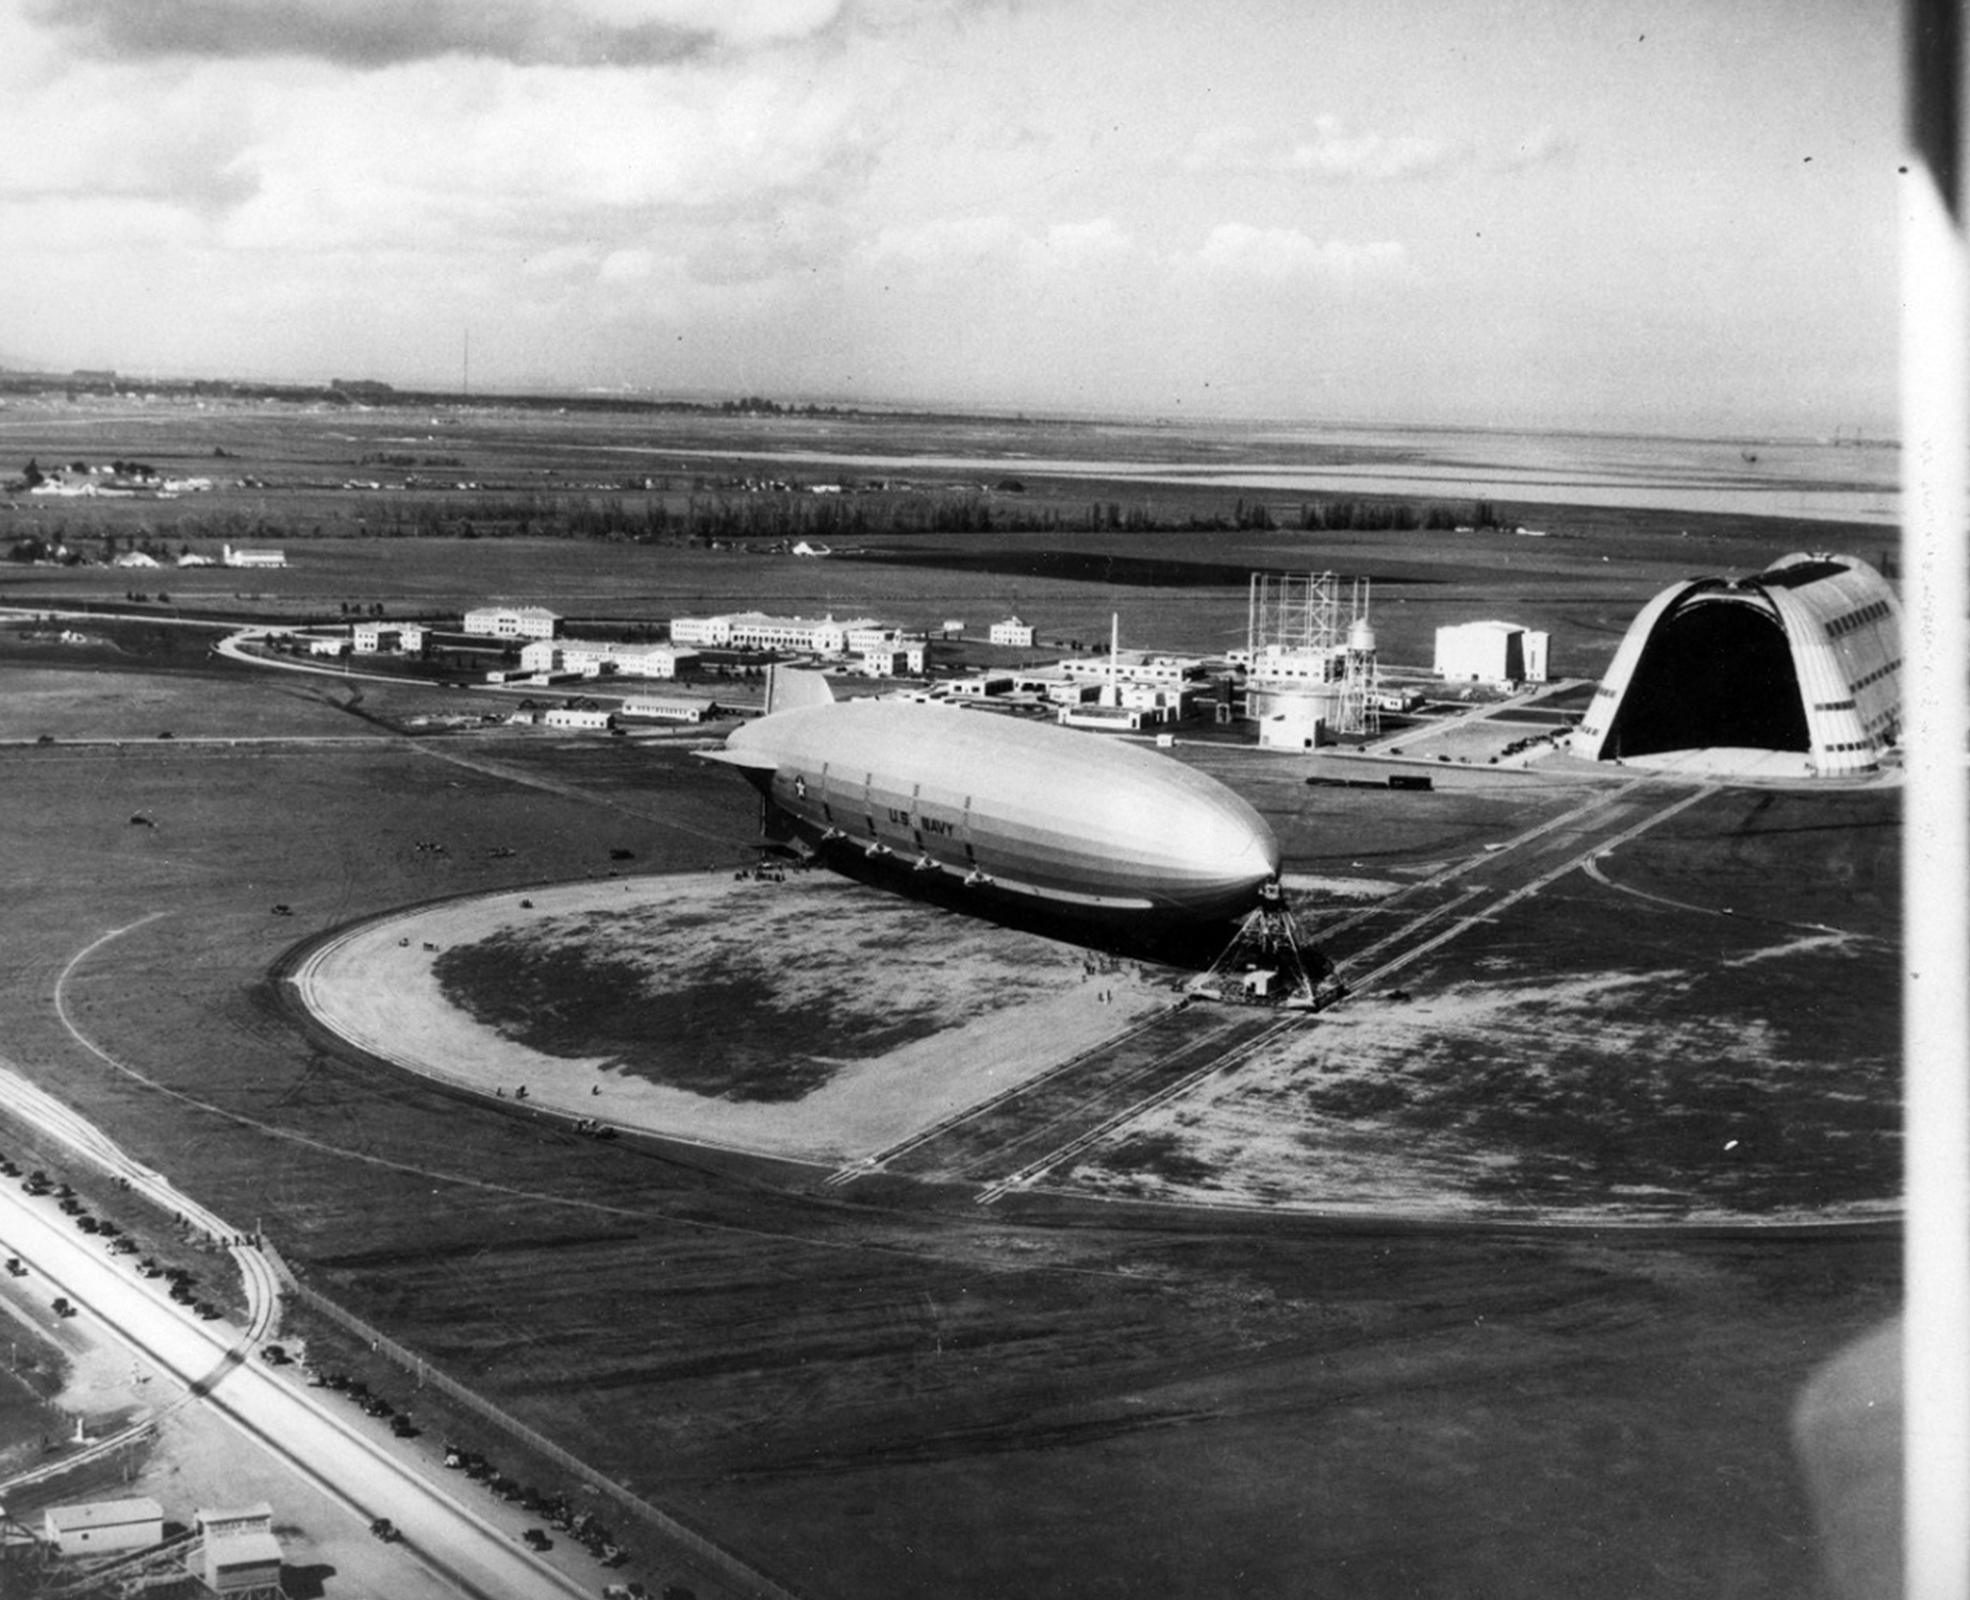 A birds-eye view of the USS Macon dirigible attached to a mooring mast on the airfield near the huge open doors of Hangar 1.